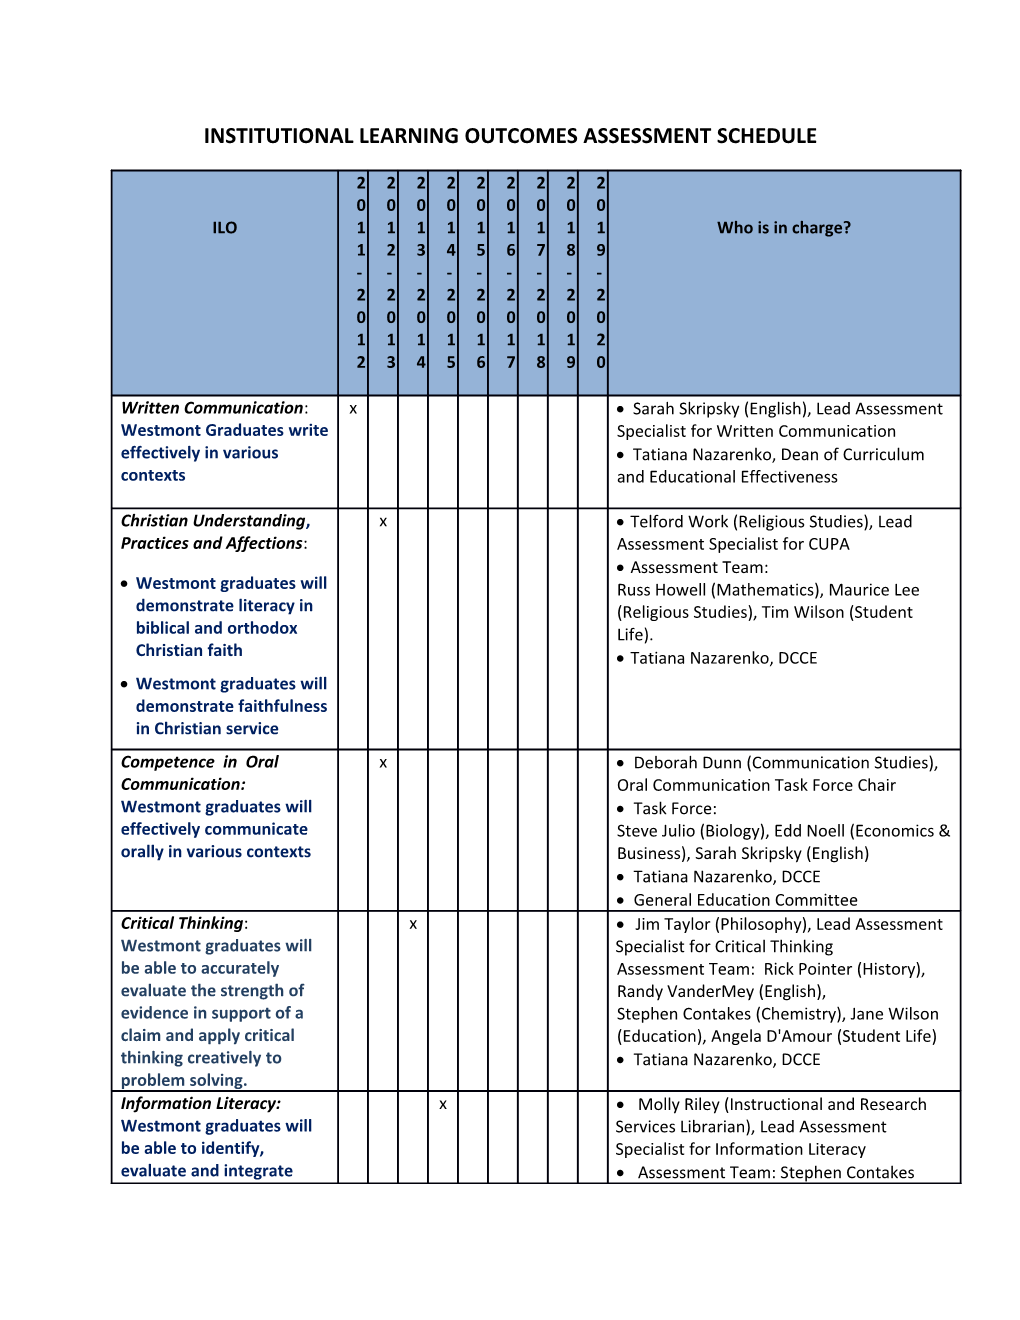 Institutional Learning Outcomes Assessment Schedule